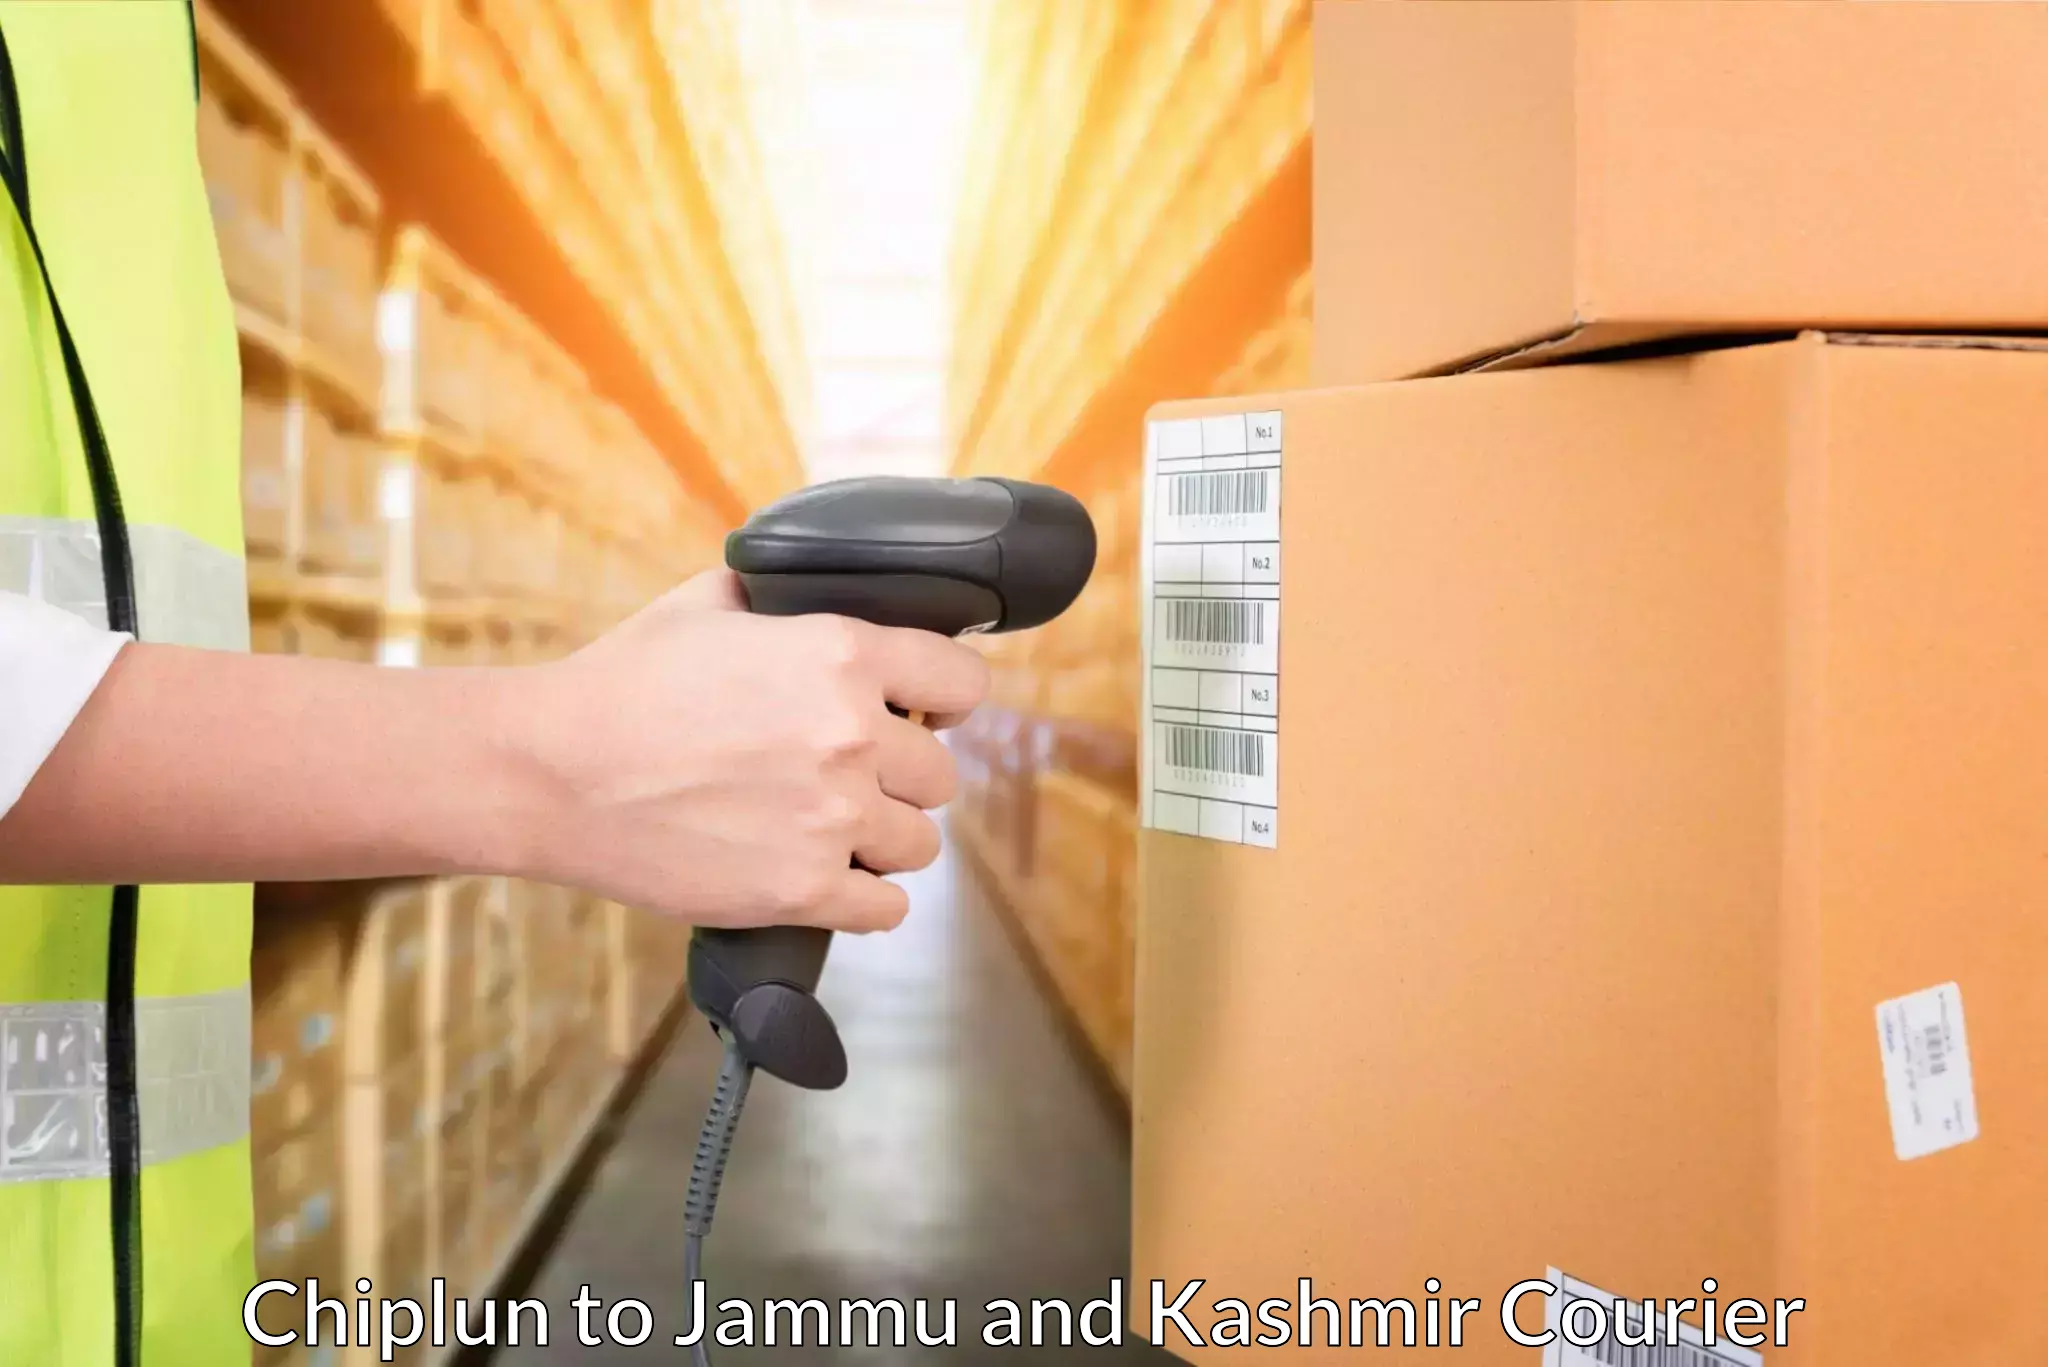 Quality courier partnerships Chiplun to Jammu and Kashmir